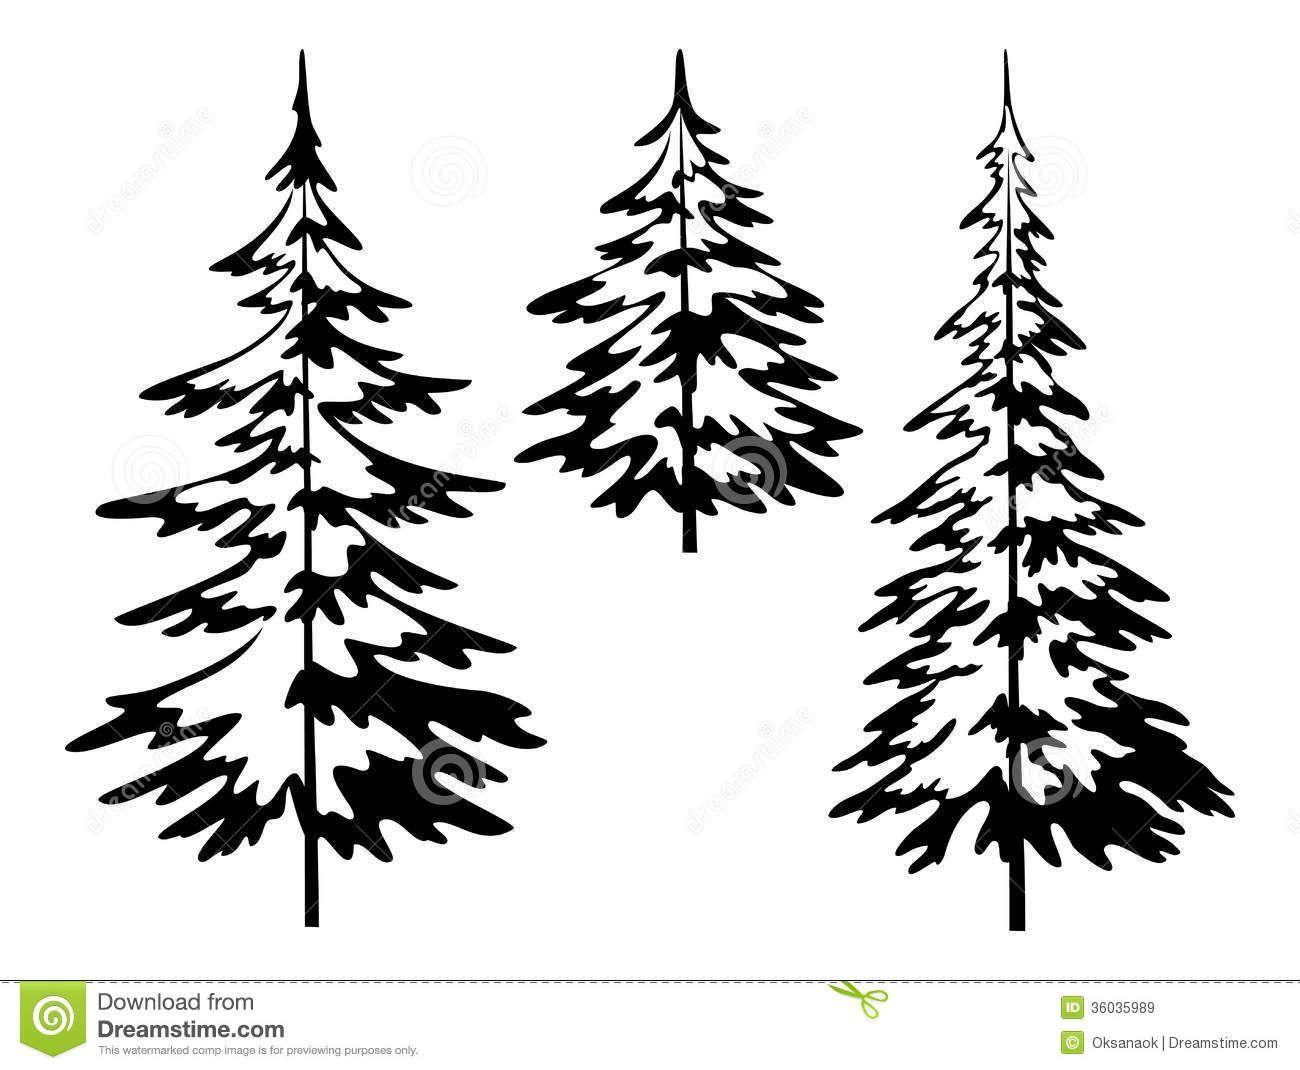 Black and White Pine Tree Logo - Black And White Pine Tree Outline Sketch Coloring Page. I'm gonna